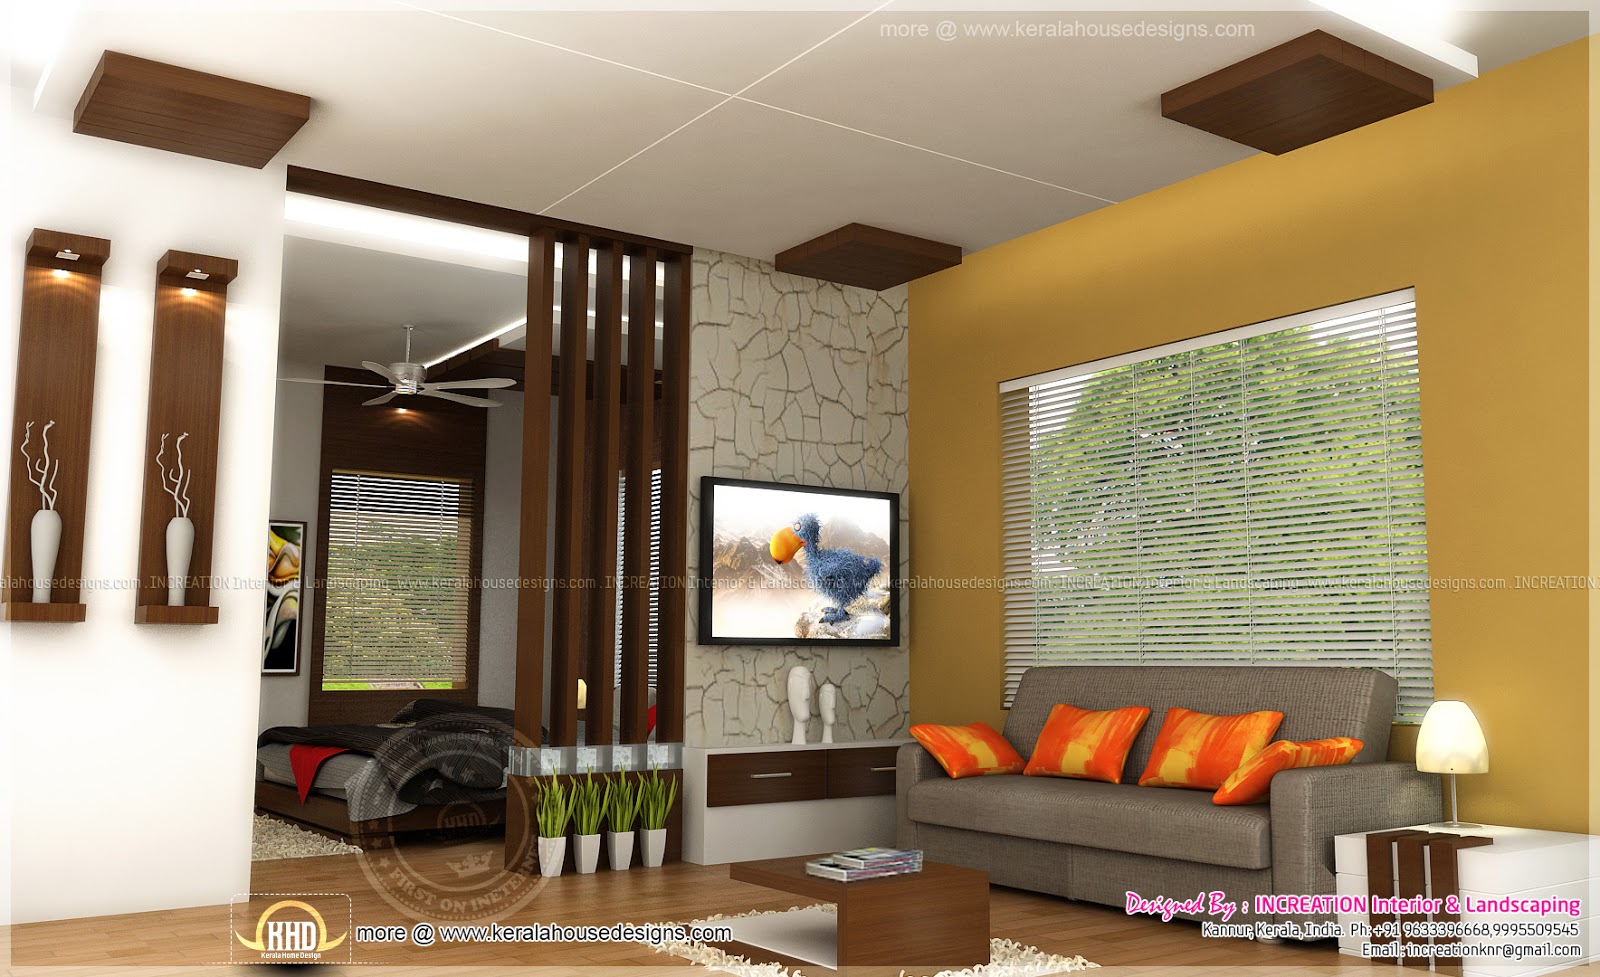 For more info about these interior renderings, contact